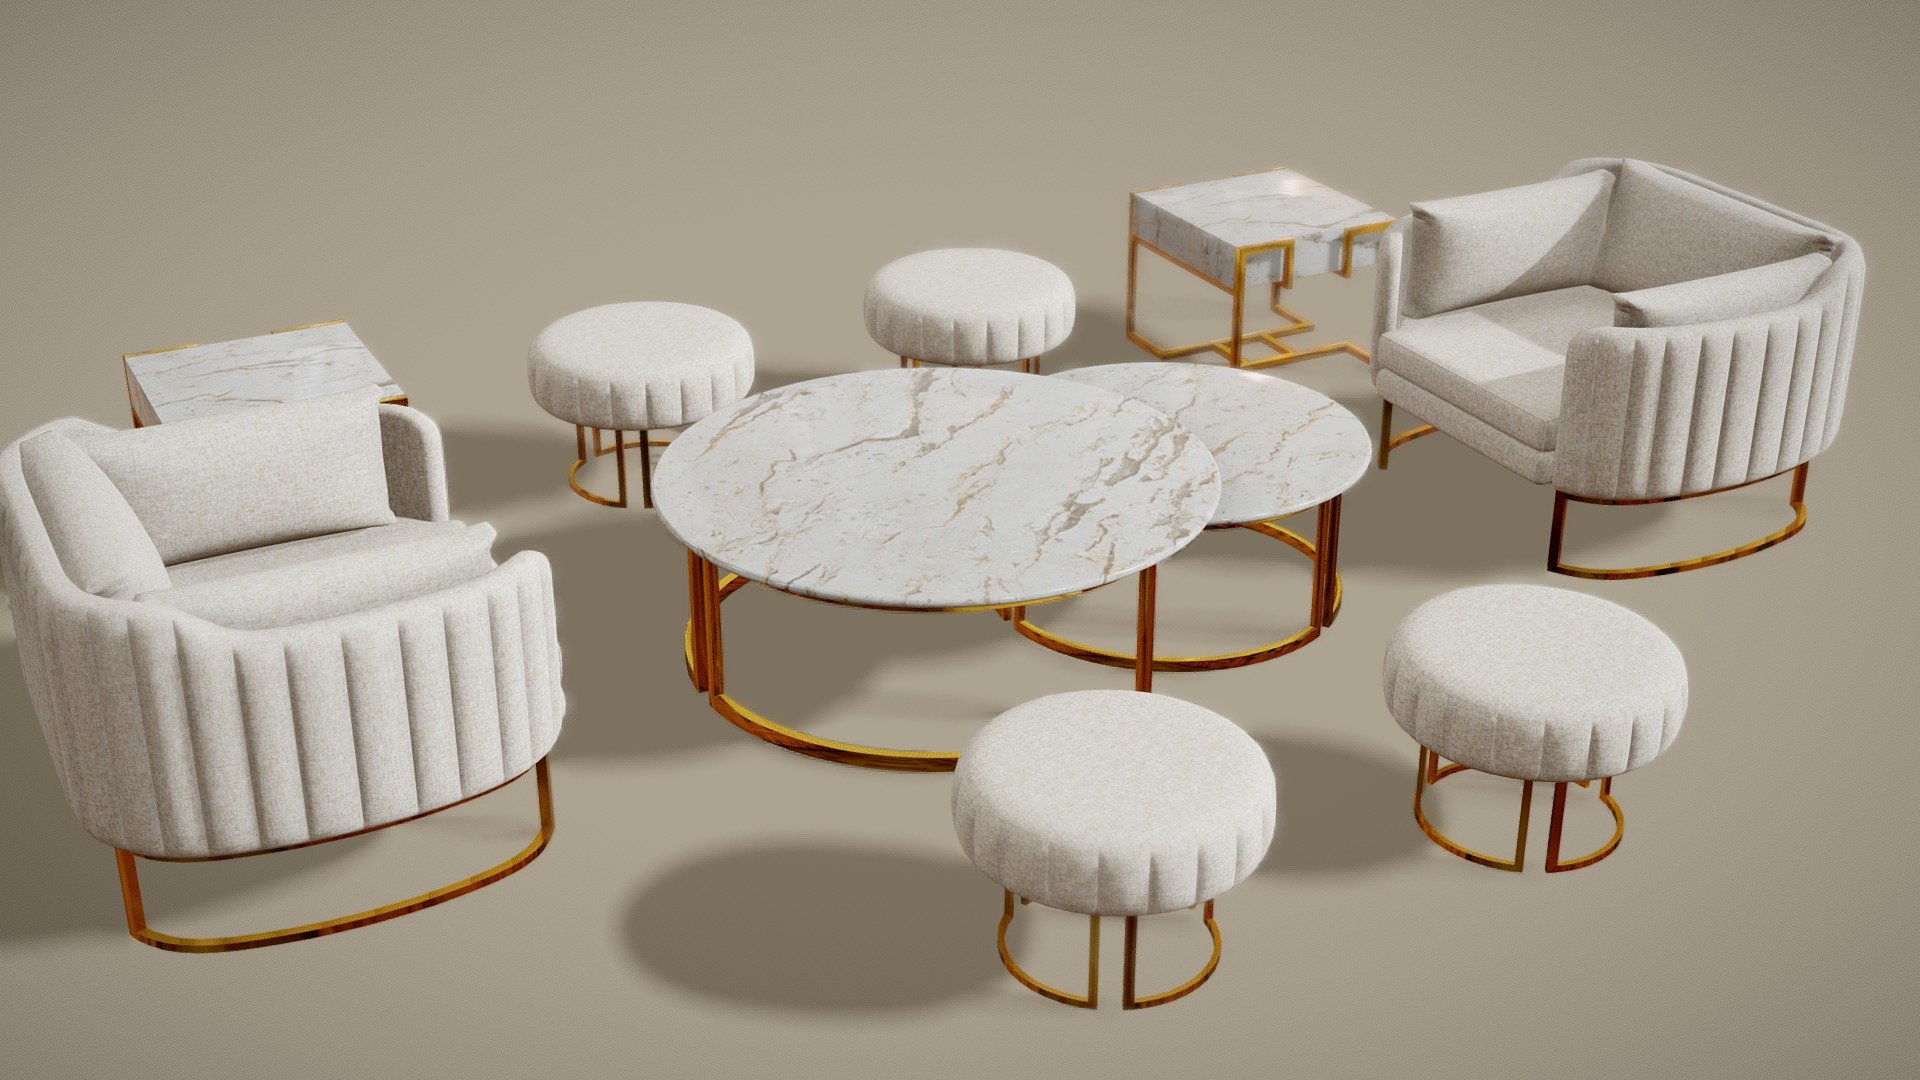 Thats a Sofa Set 03.
It includes 2 types of Sitting place &amp; 2 types of table.
They can be rearranged to match the surroundings 3d model